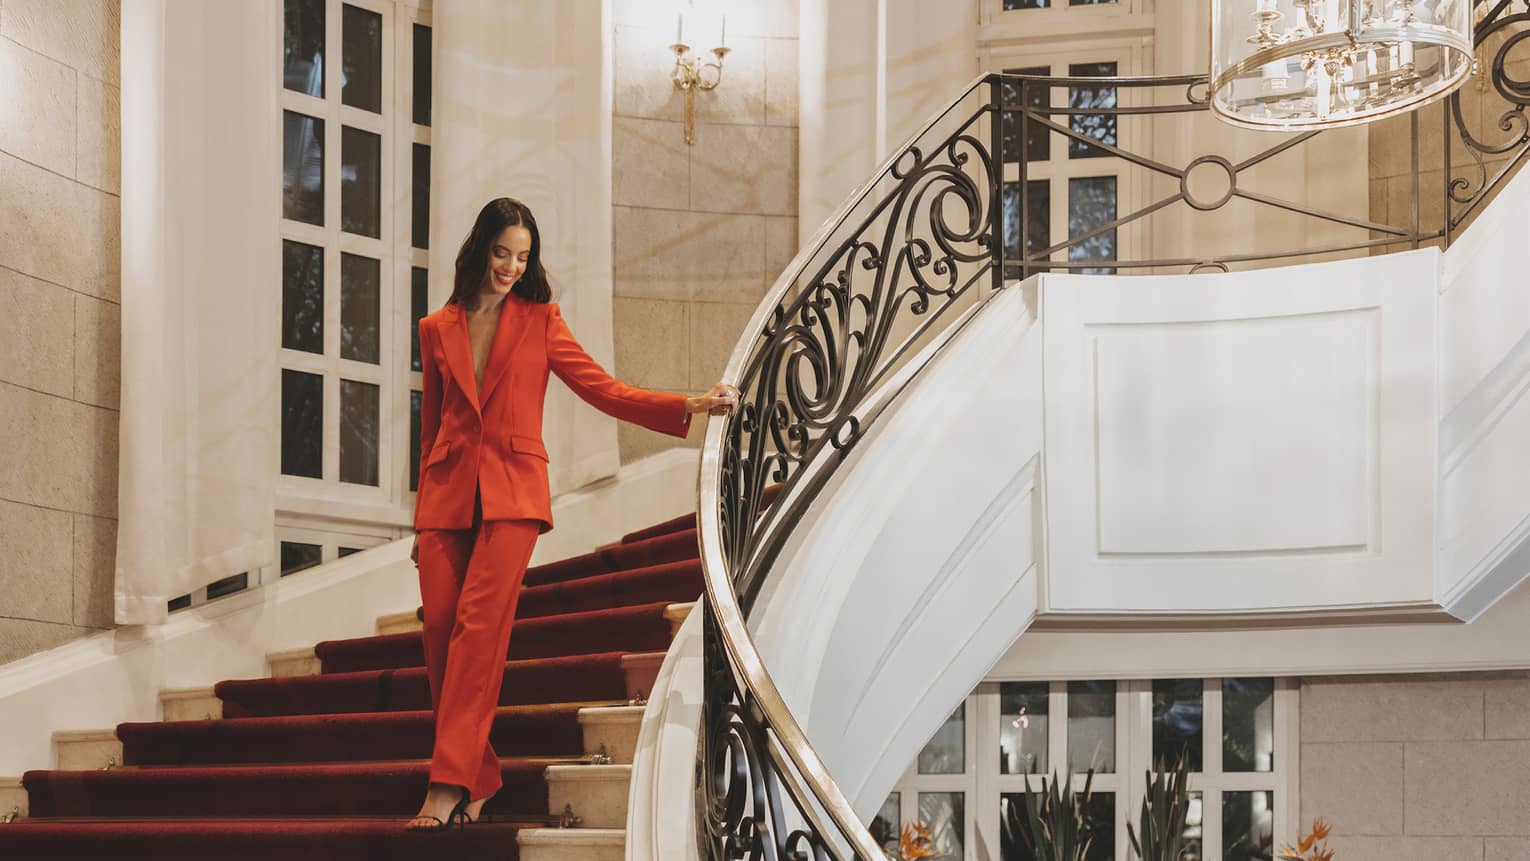 A woman in a red suit walking down stairs.